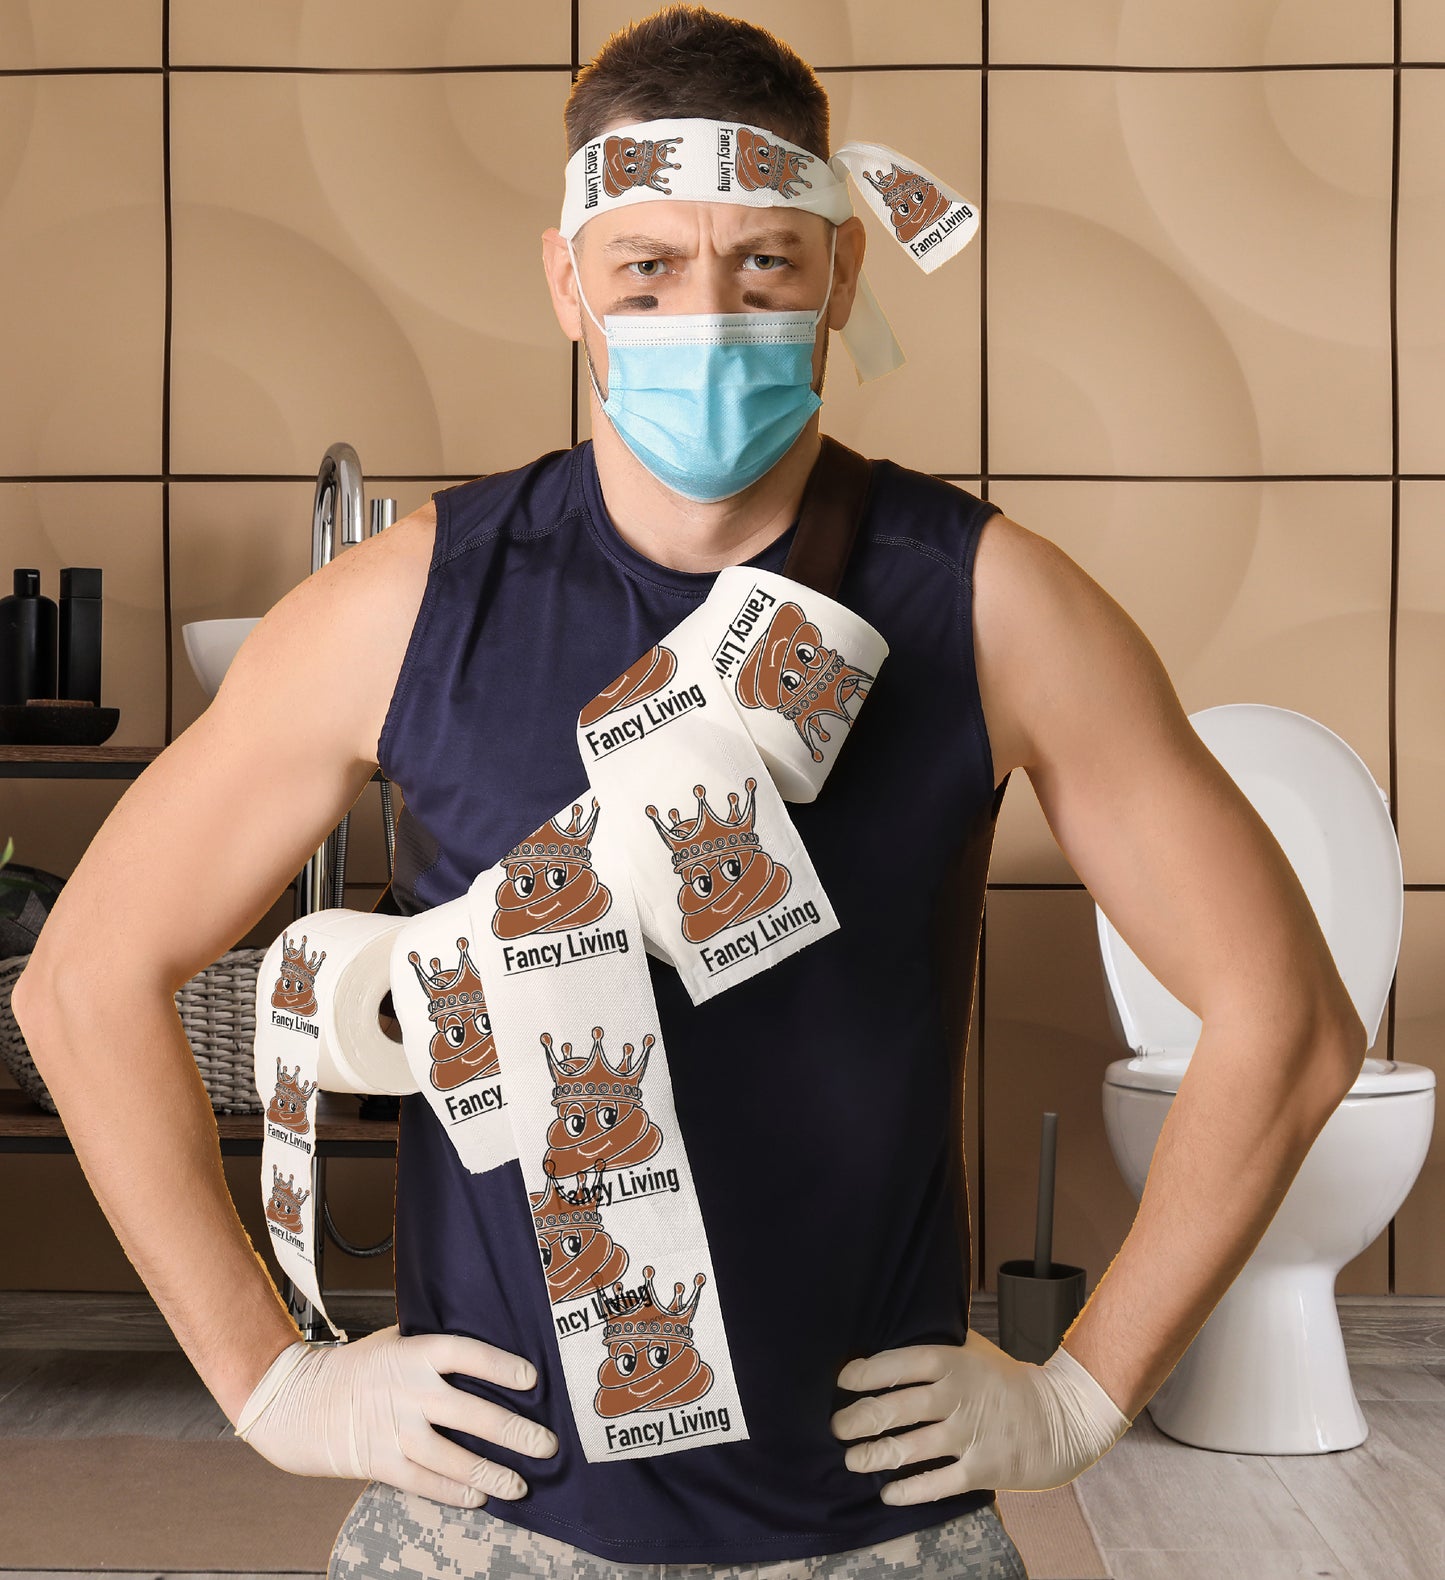 Printed TP Funny Fancy Living Printed Toilet Paper Gag Gift – 500 Sheets